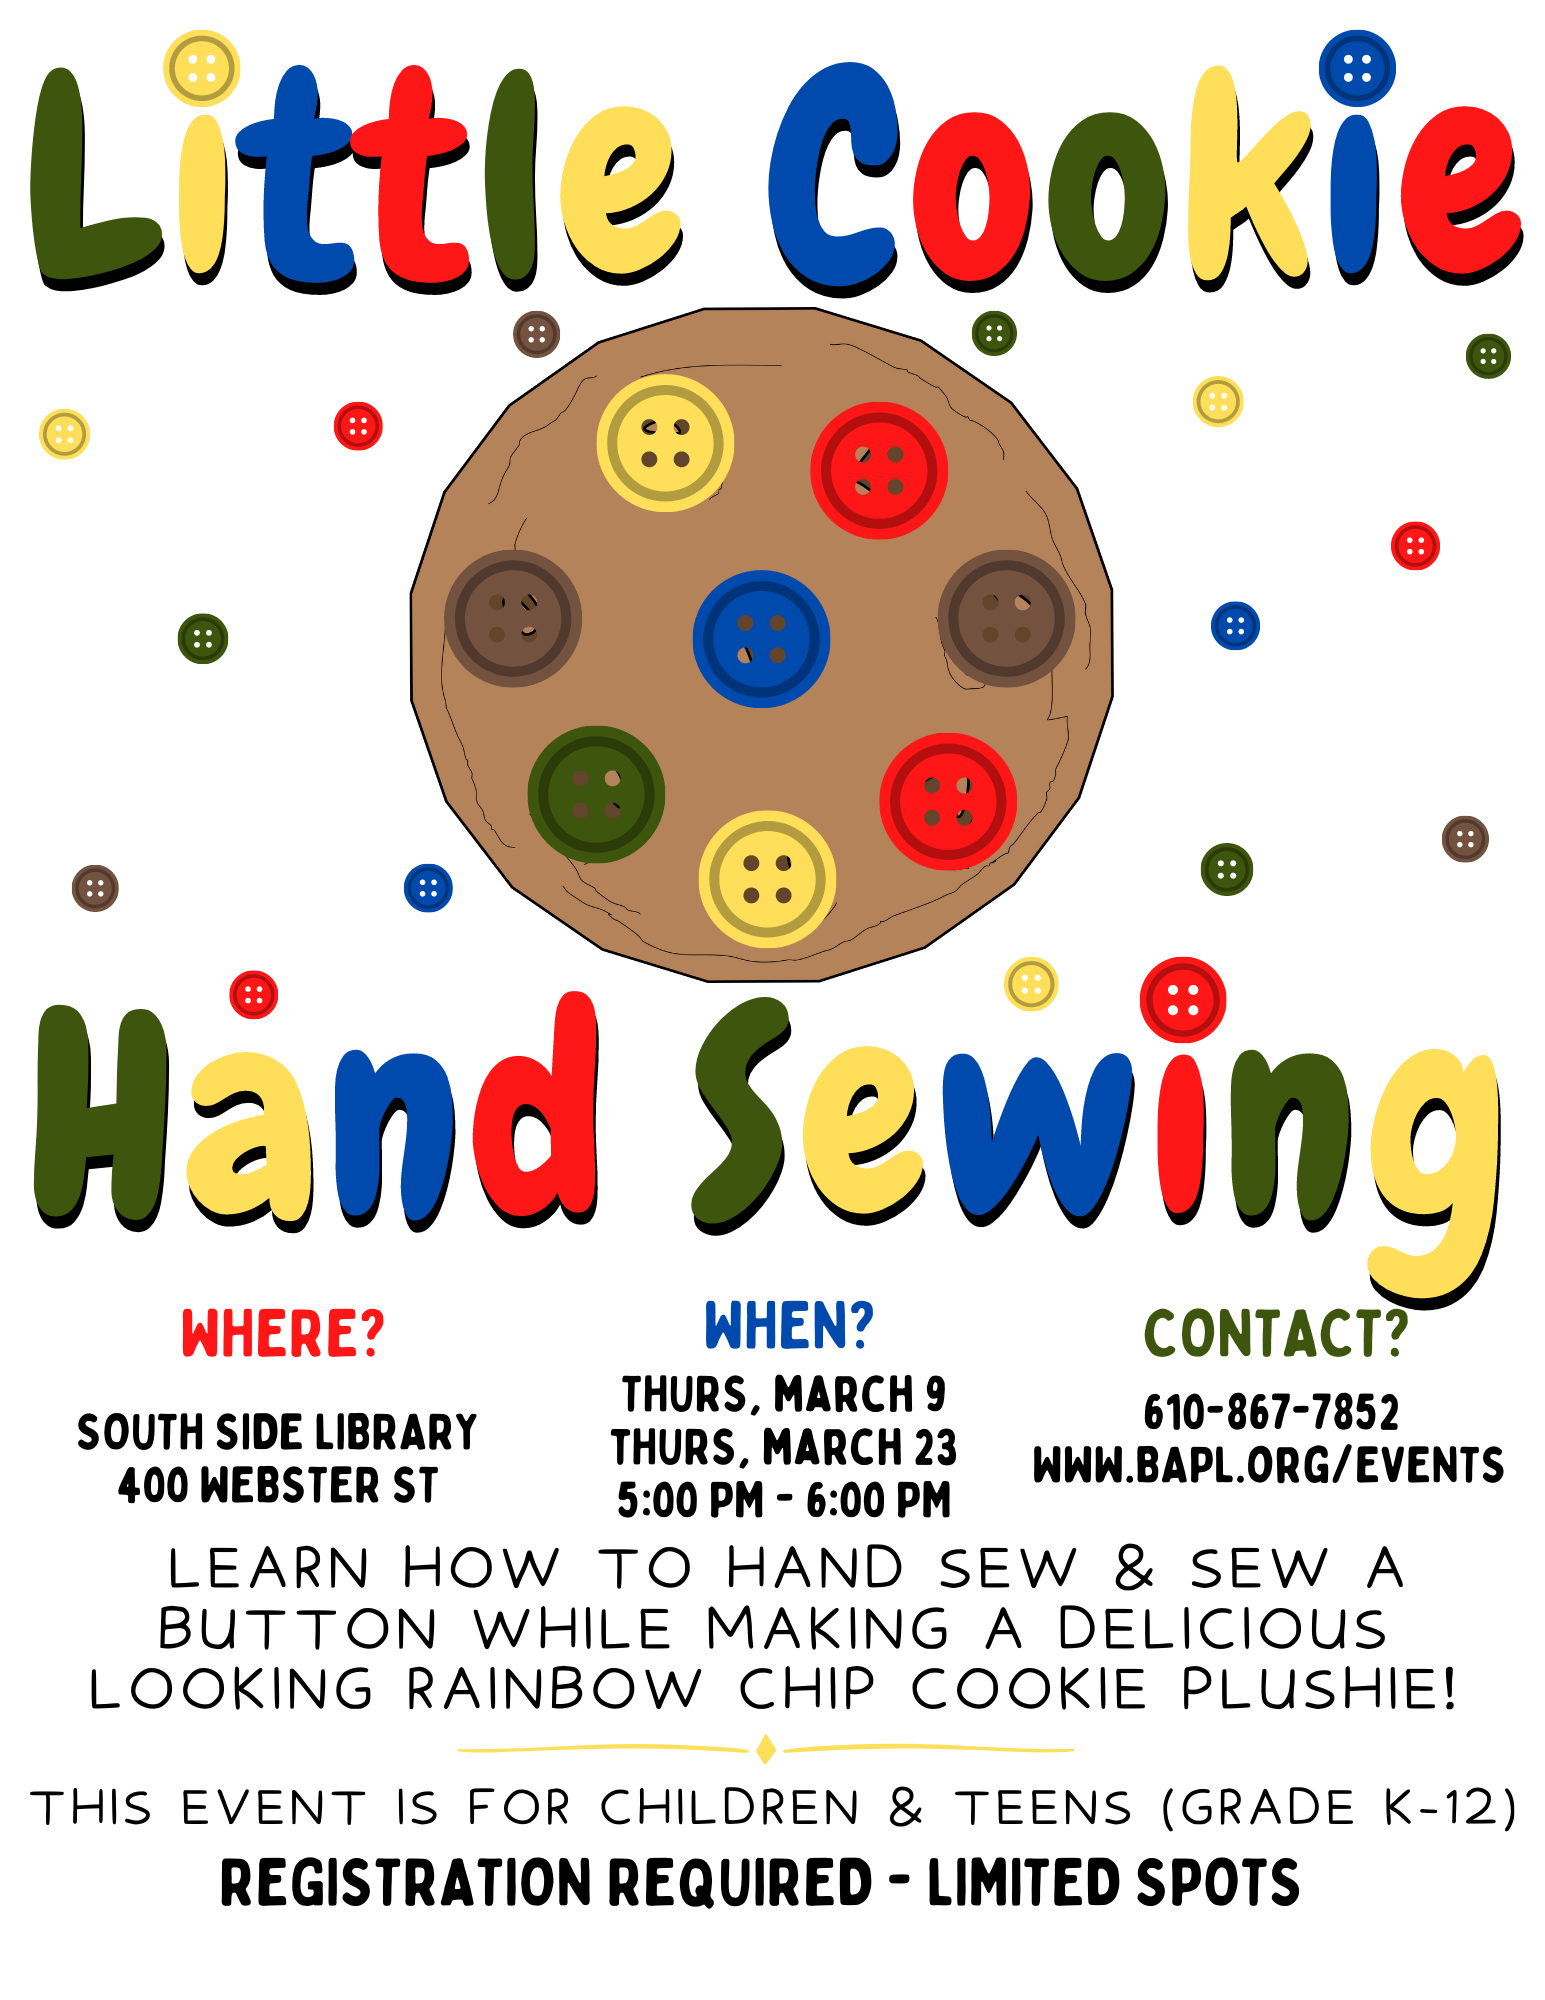 Little Cookie Hand Sewing Thursday, March 9 and Thursday March 23 5:00 PM - 6:00 PM